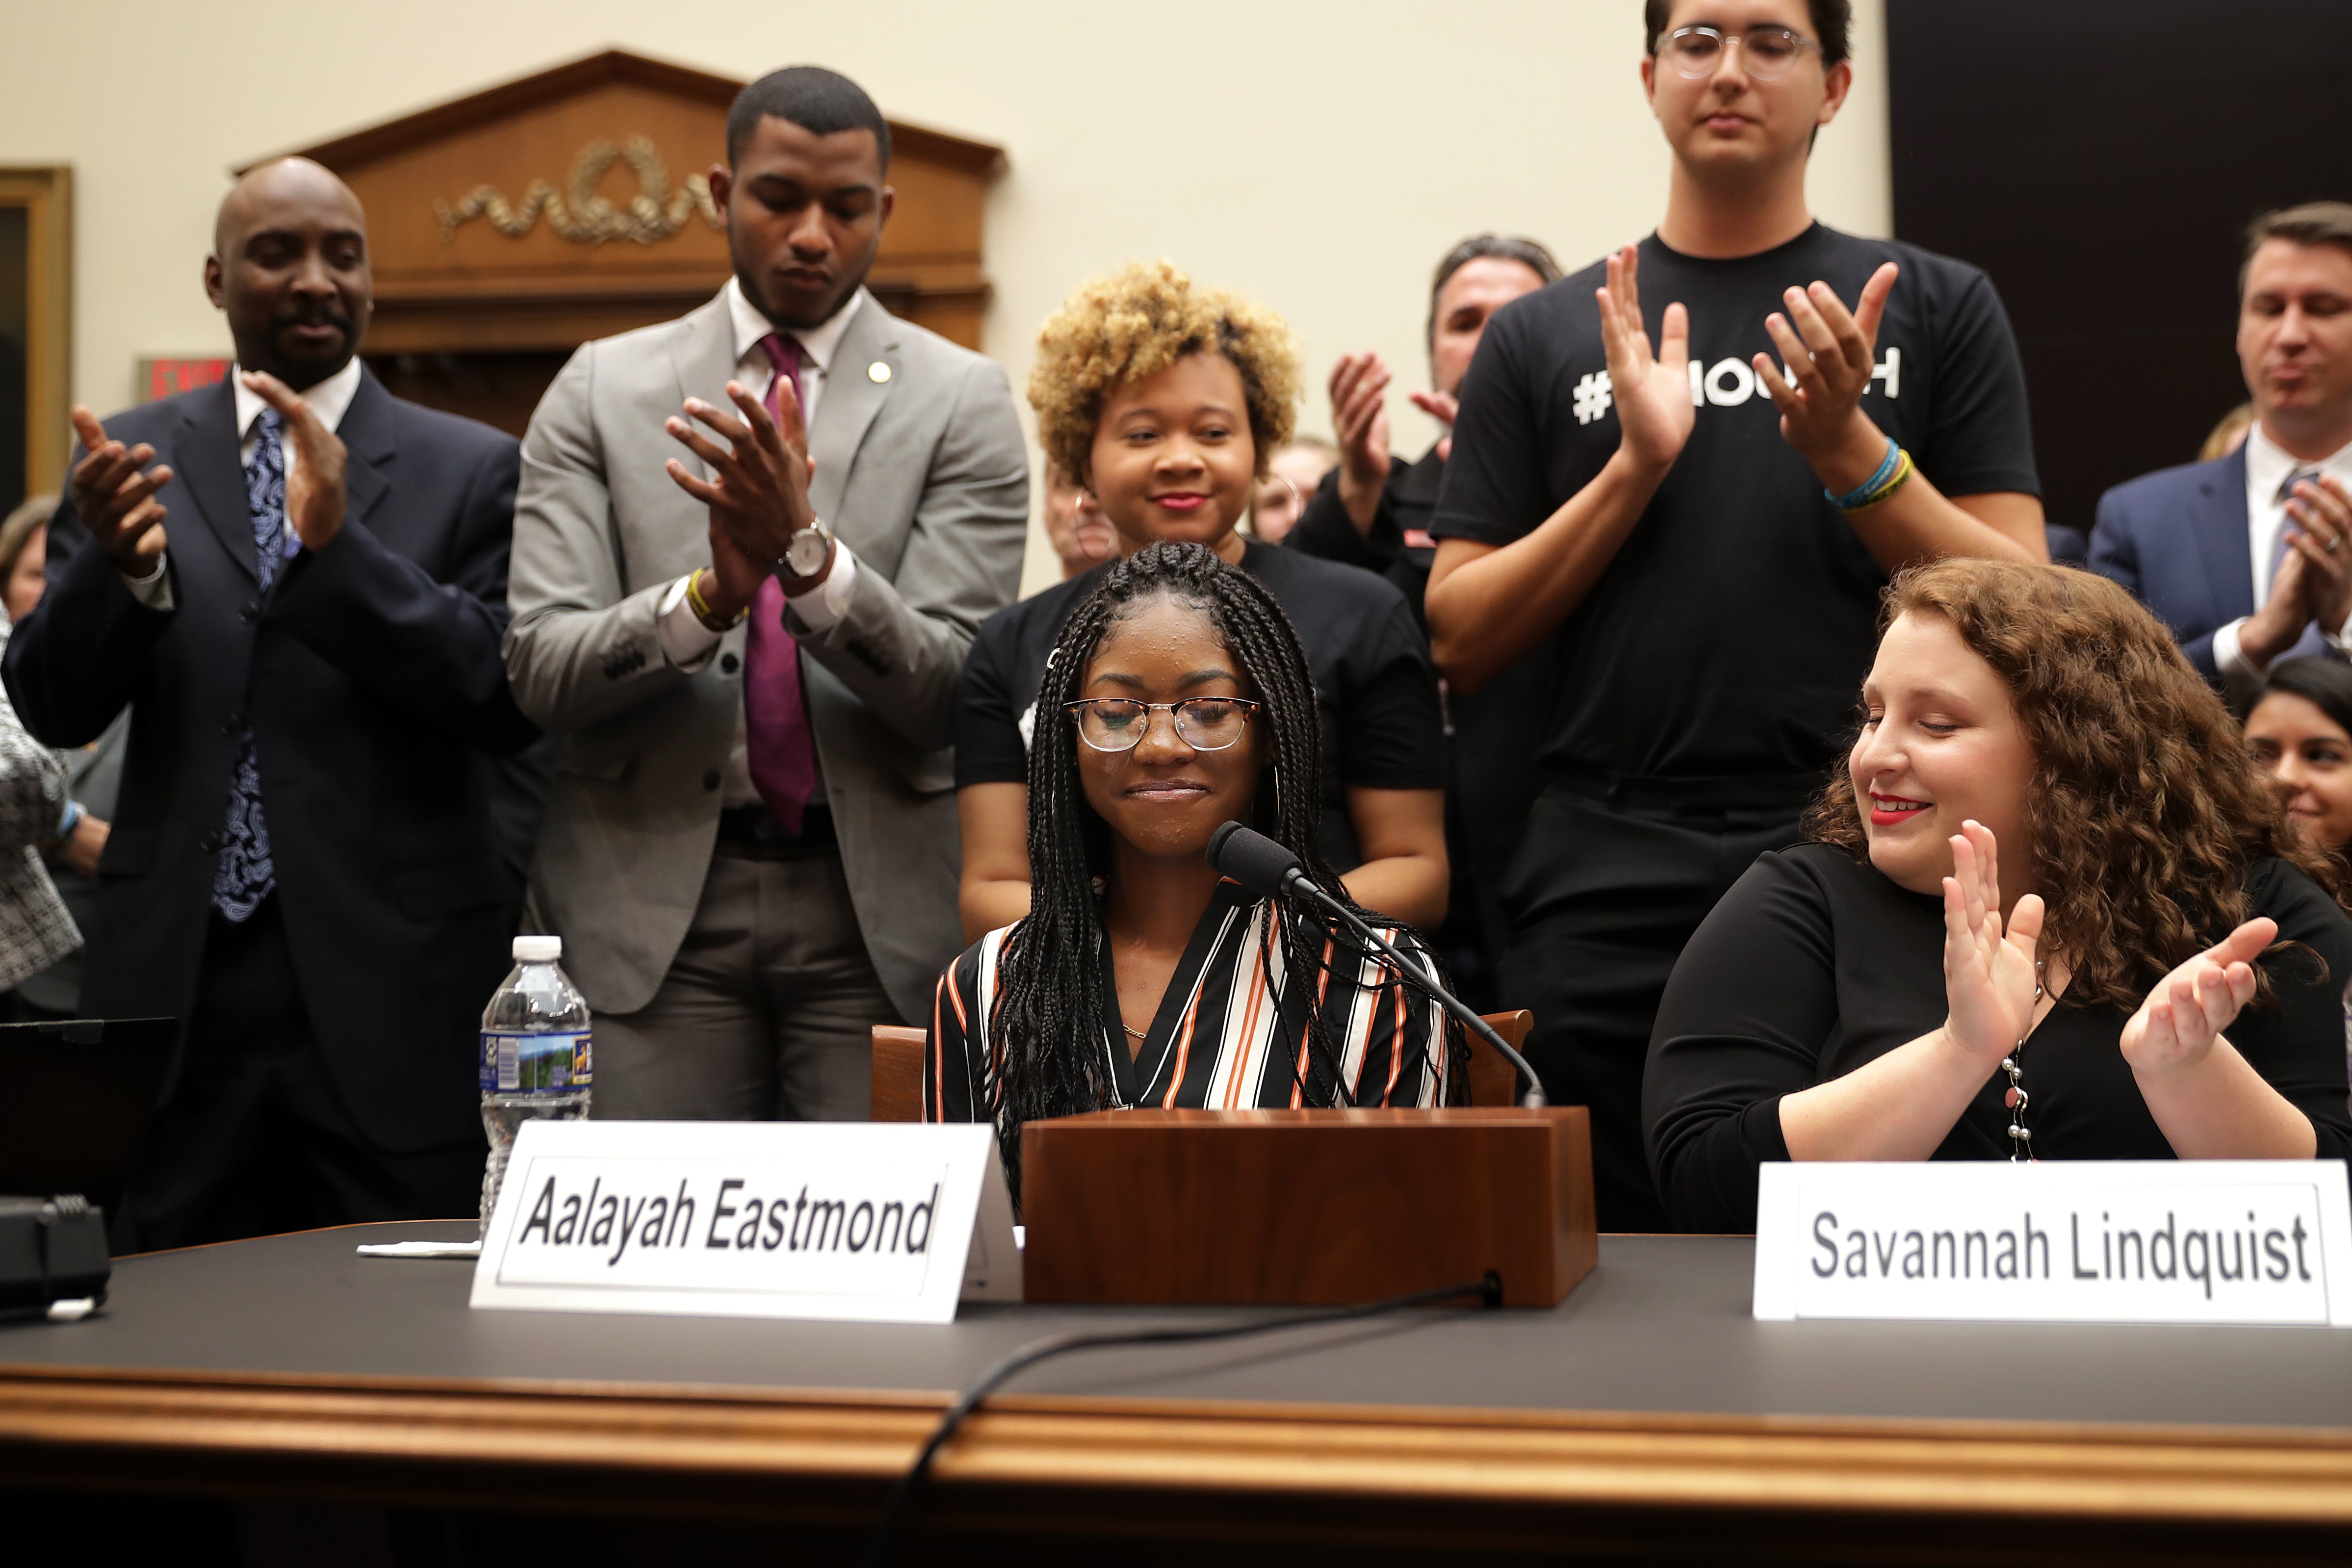 Aalayah Eastmond (C), a survivor of the mass shooting at Marjory Stoneman Douglas High School in Parkland, Florida, receives a standing ovation while testifying to the House Judiciary Committee in the Rayburn House Office Building on Capitol Hill February 06, 2019 in Washington, DC. (Photo by Chip Somodevilla/Getty Images)